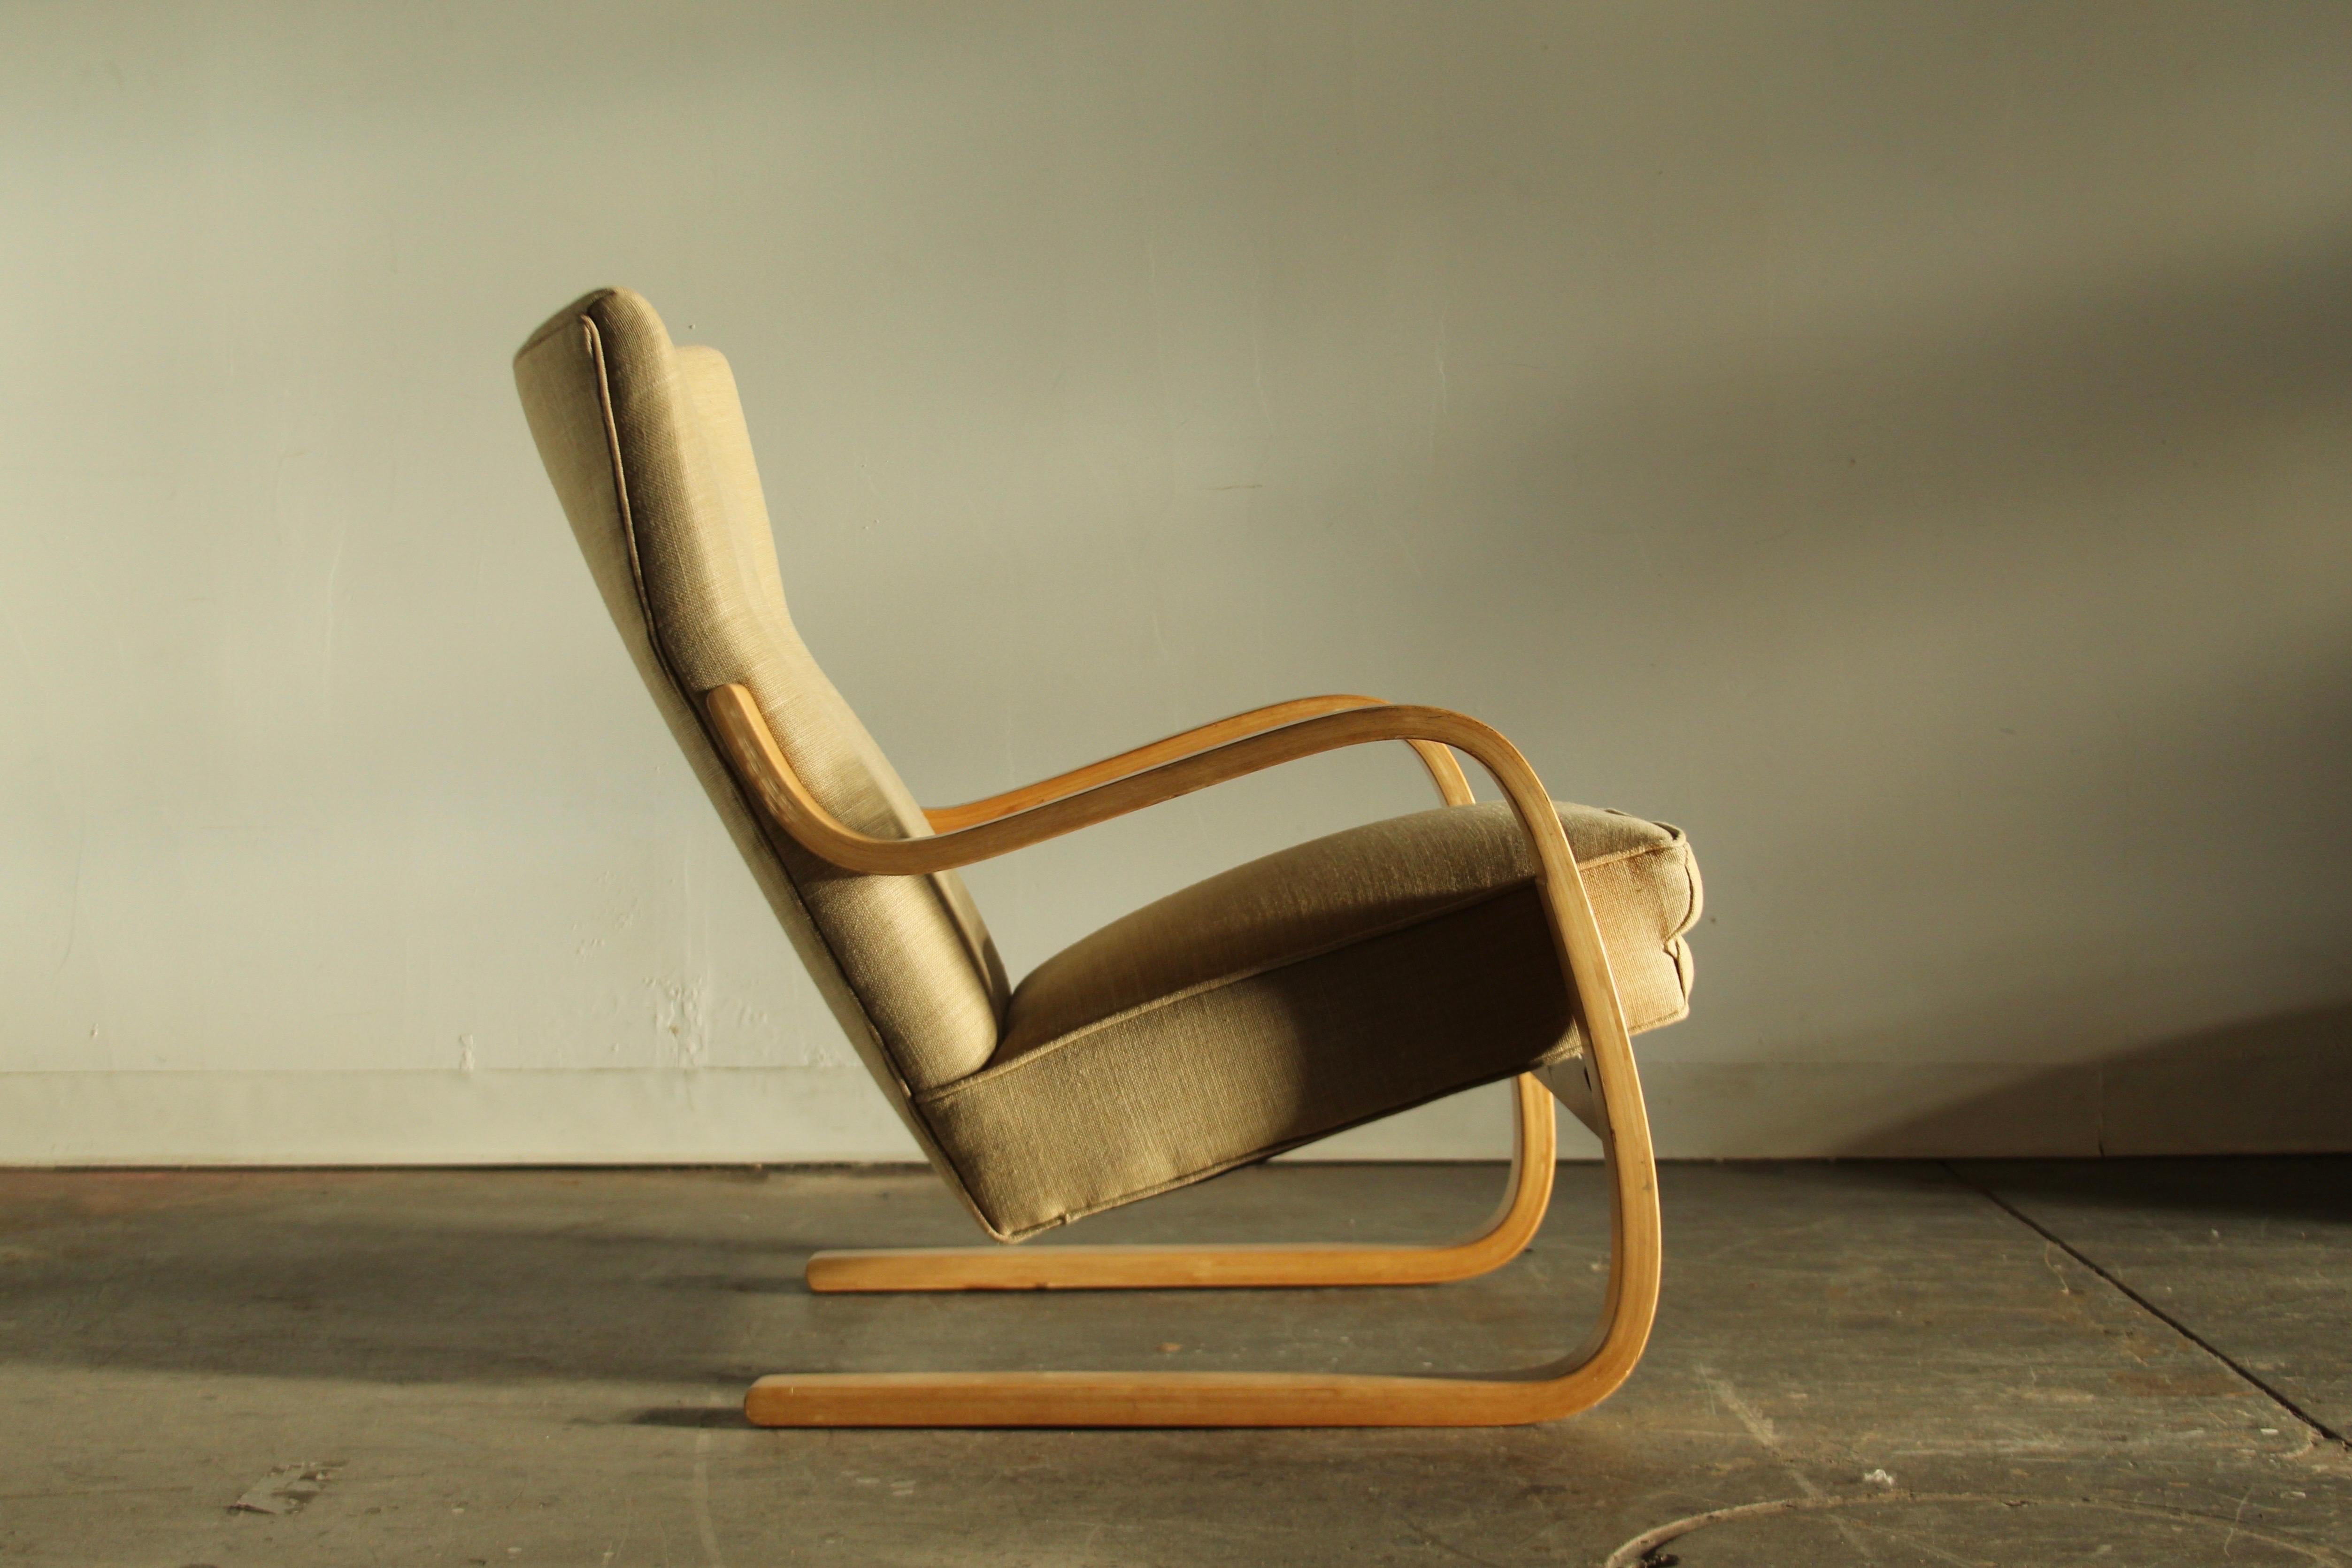 Finnish Alvar Aalto Early Model 401 Bentwood Lounge Chair, 1940s For Sale